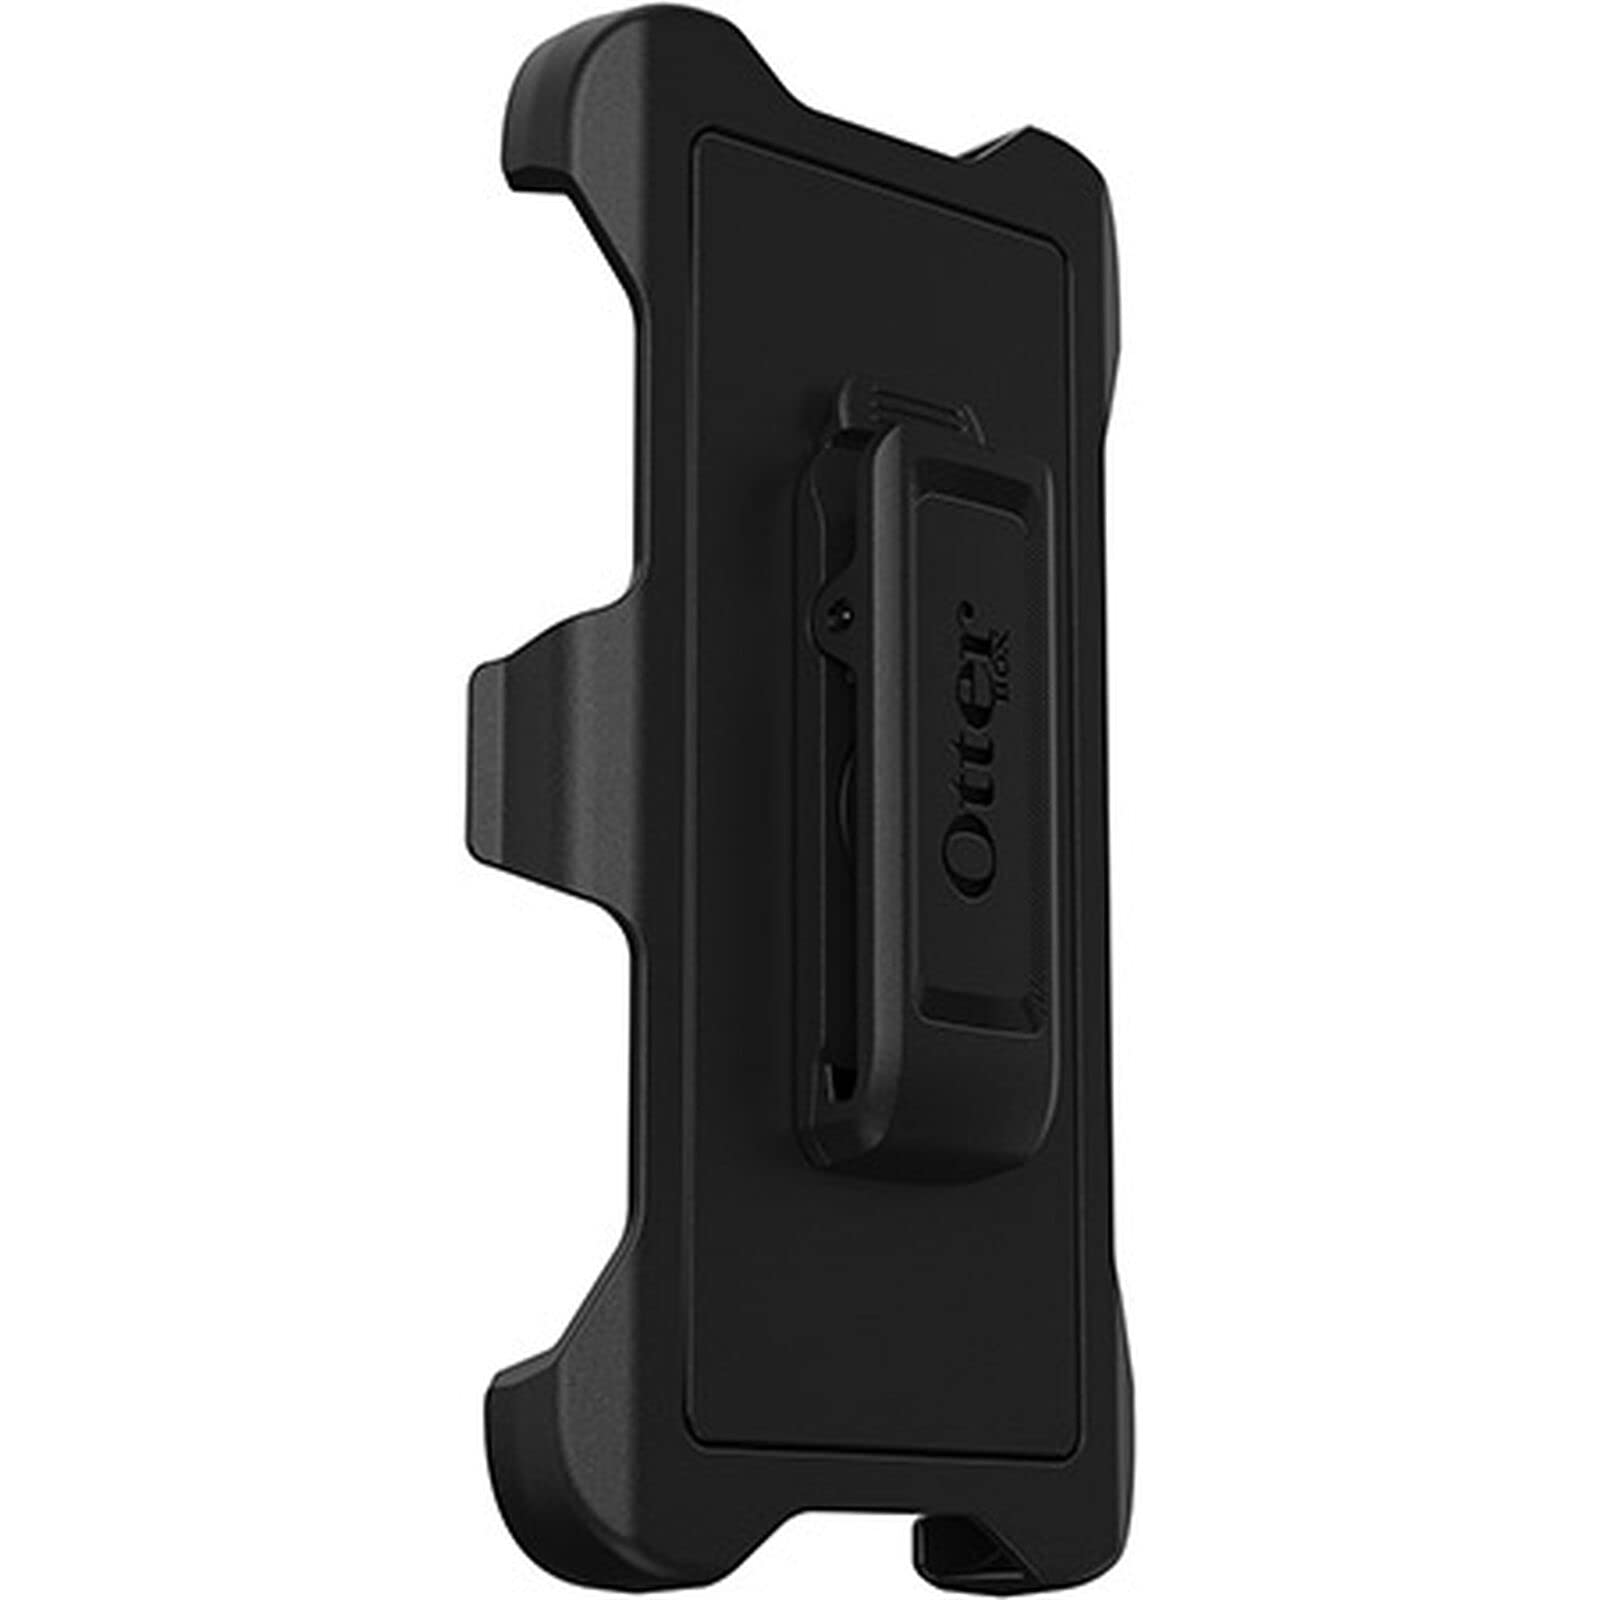 OtterBox Defender Series Holster Belt Clip Replacement for iPhone 11 (Only) - Non-Retail Packaging - Black